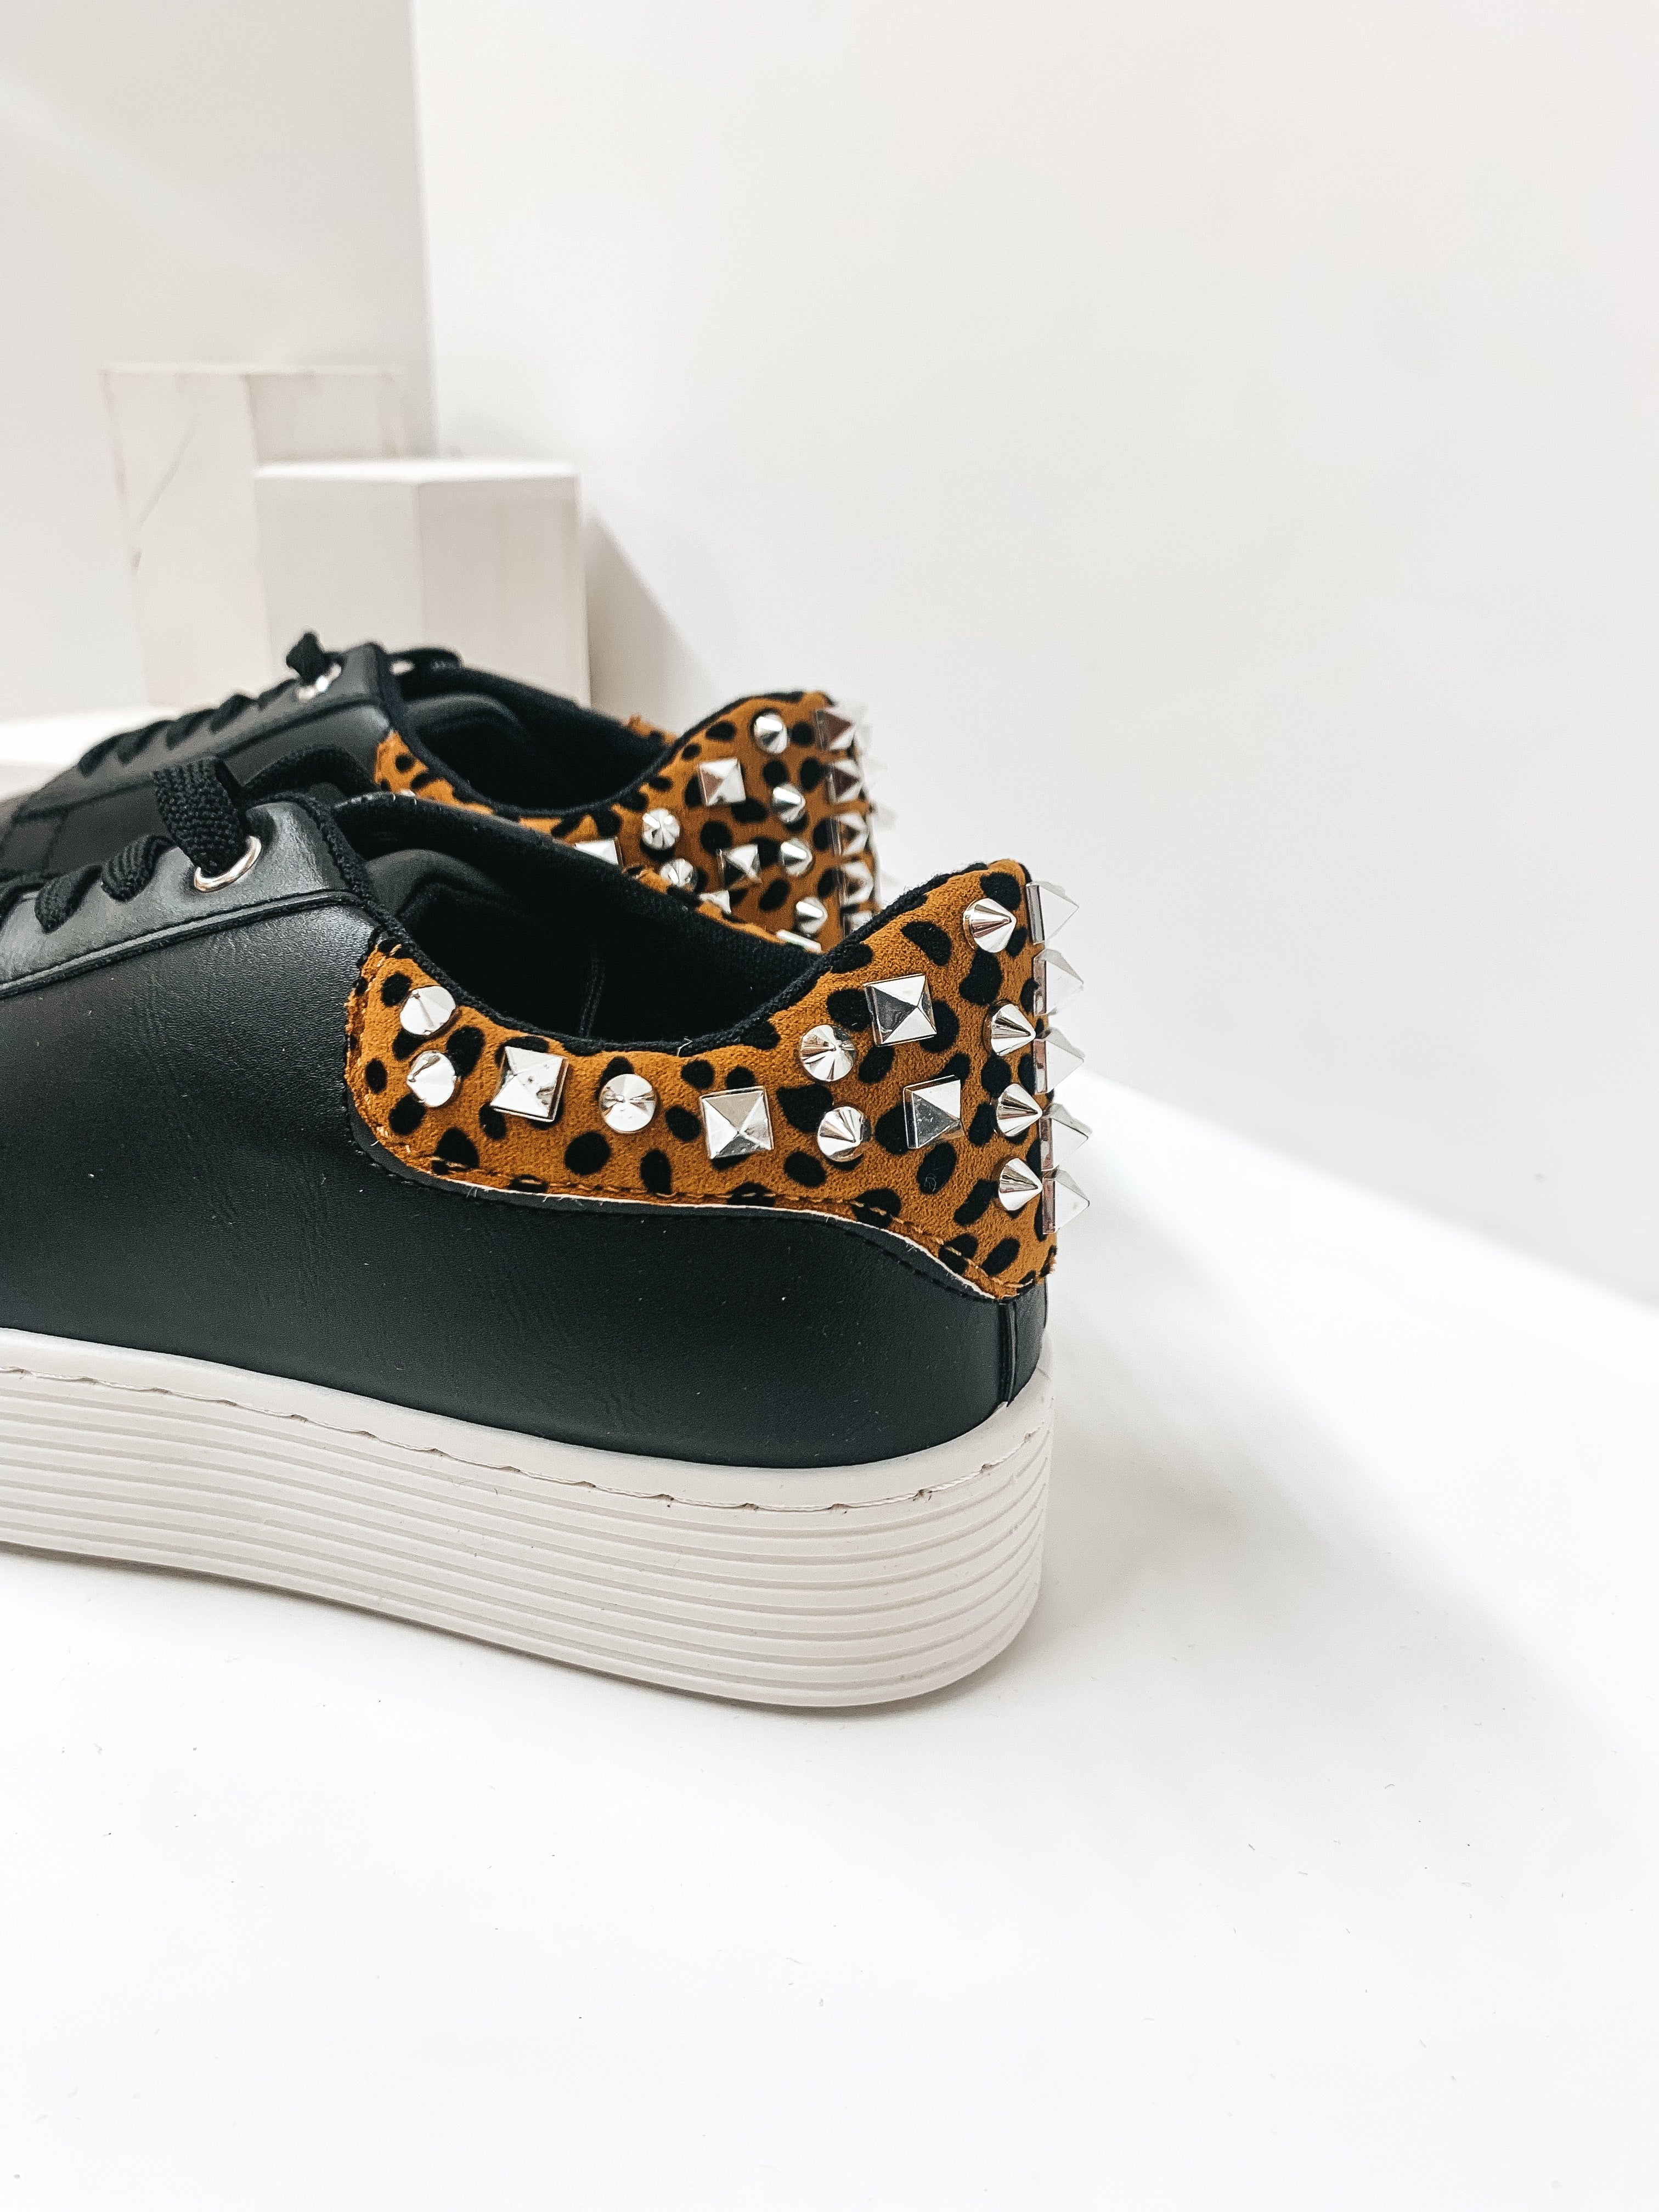 Studded Chic Lace Up Leopard Heel Platform Sneakers in Black - Giddy Up Glamour Boutique